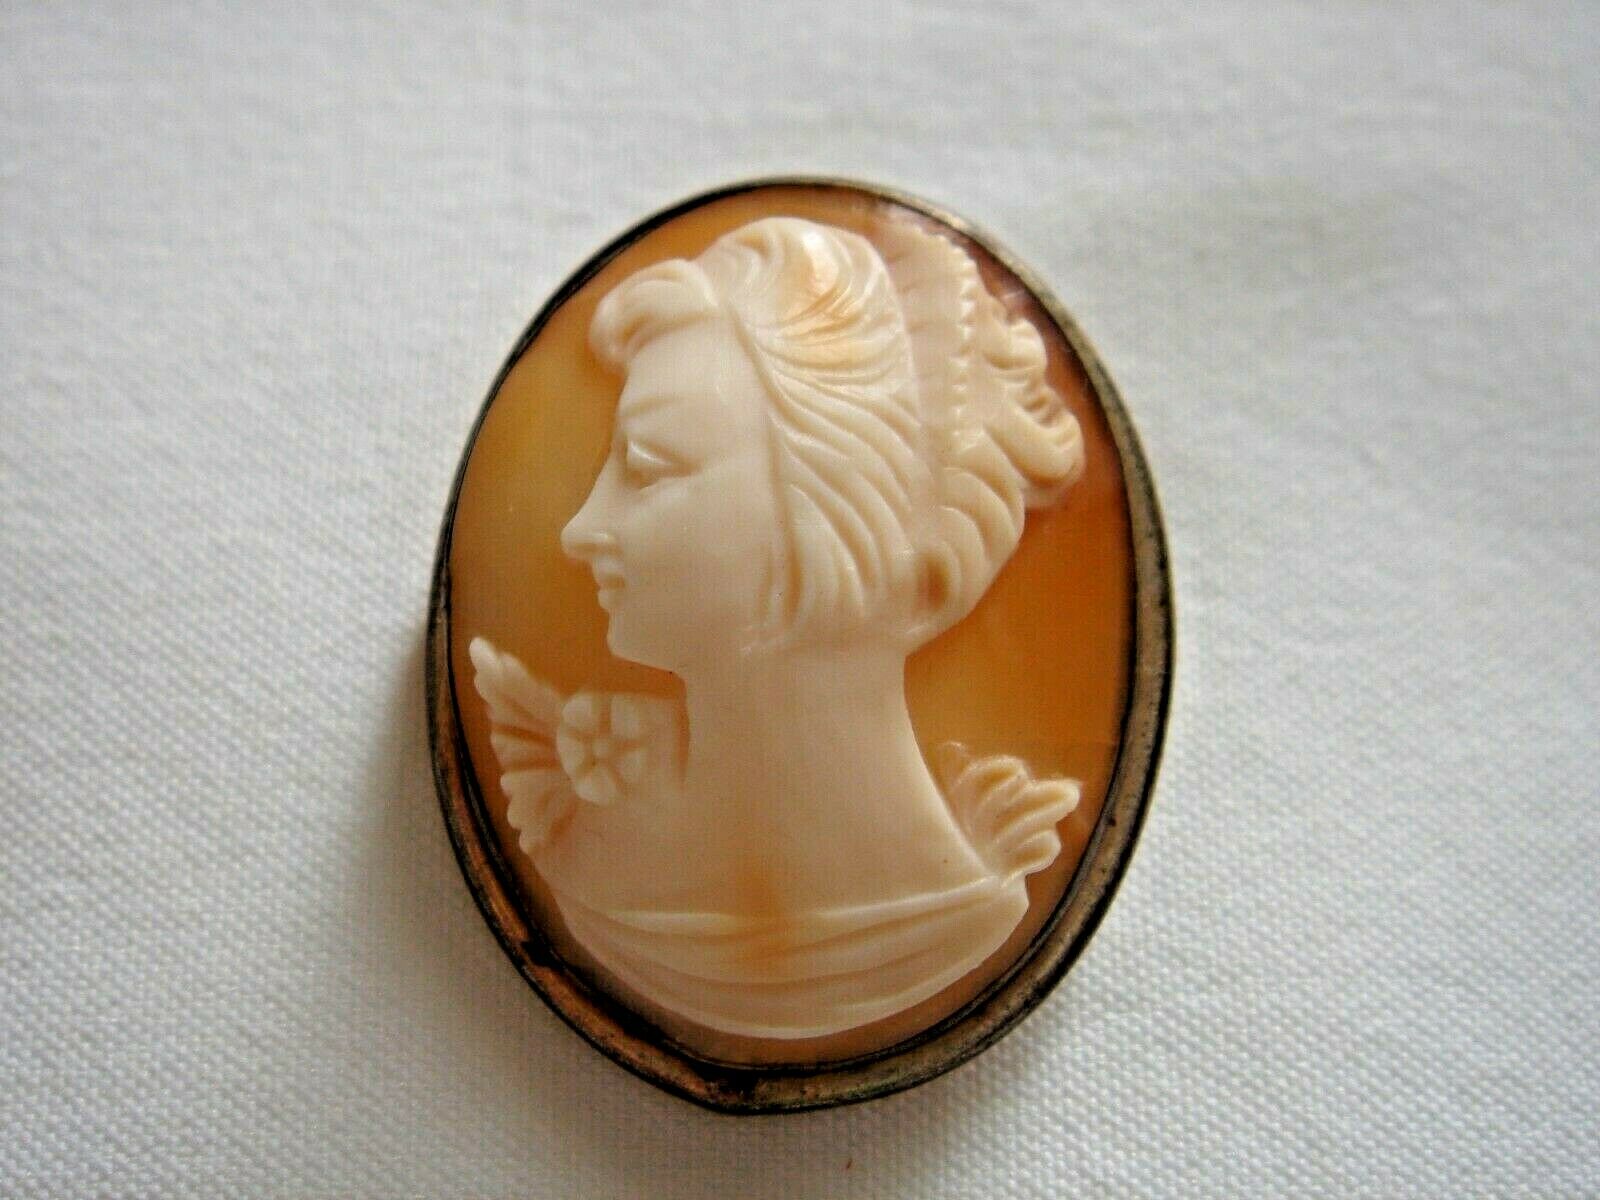 Vintage Genuine Carved Shell Cameo  Brooch  Pendant  Free Shipping